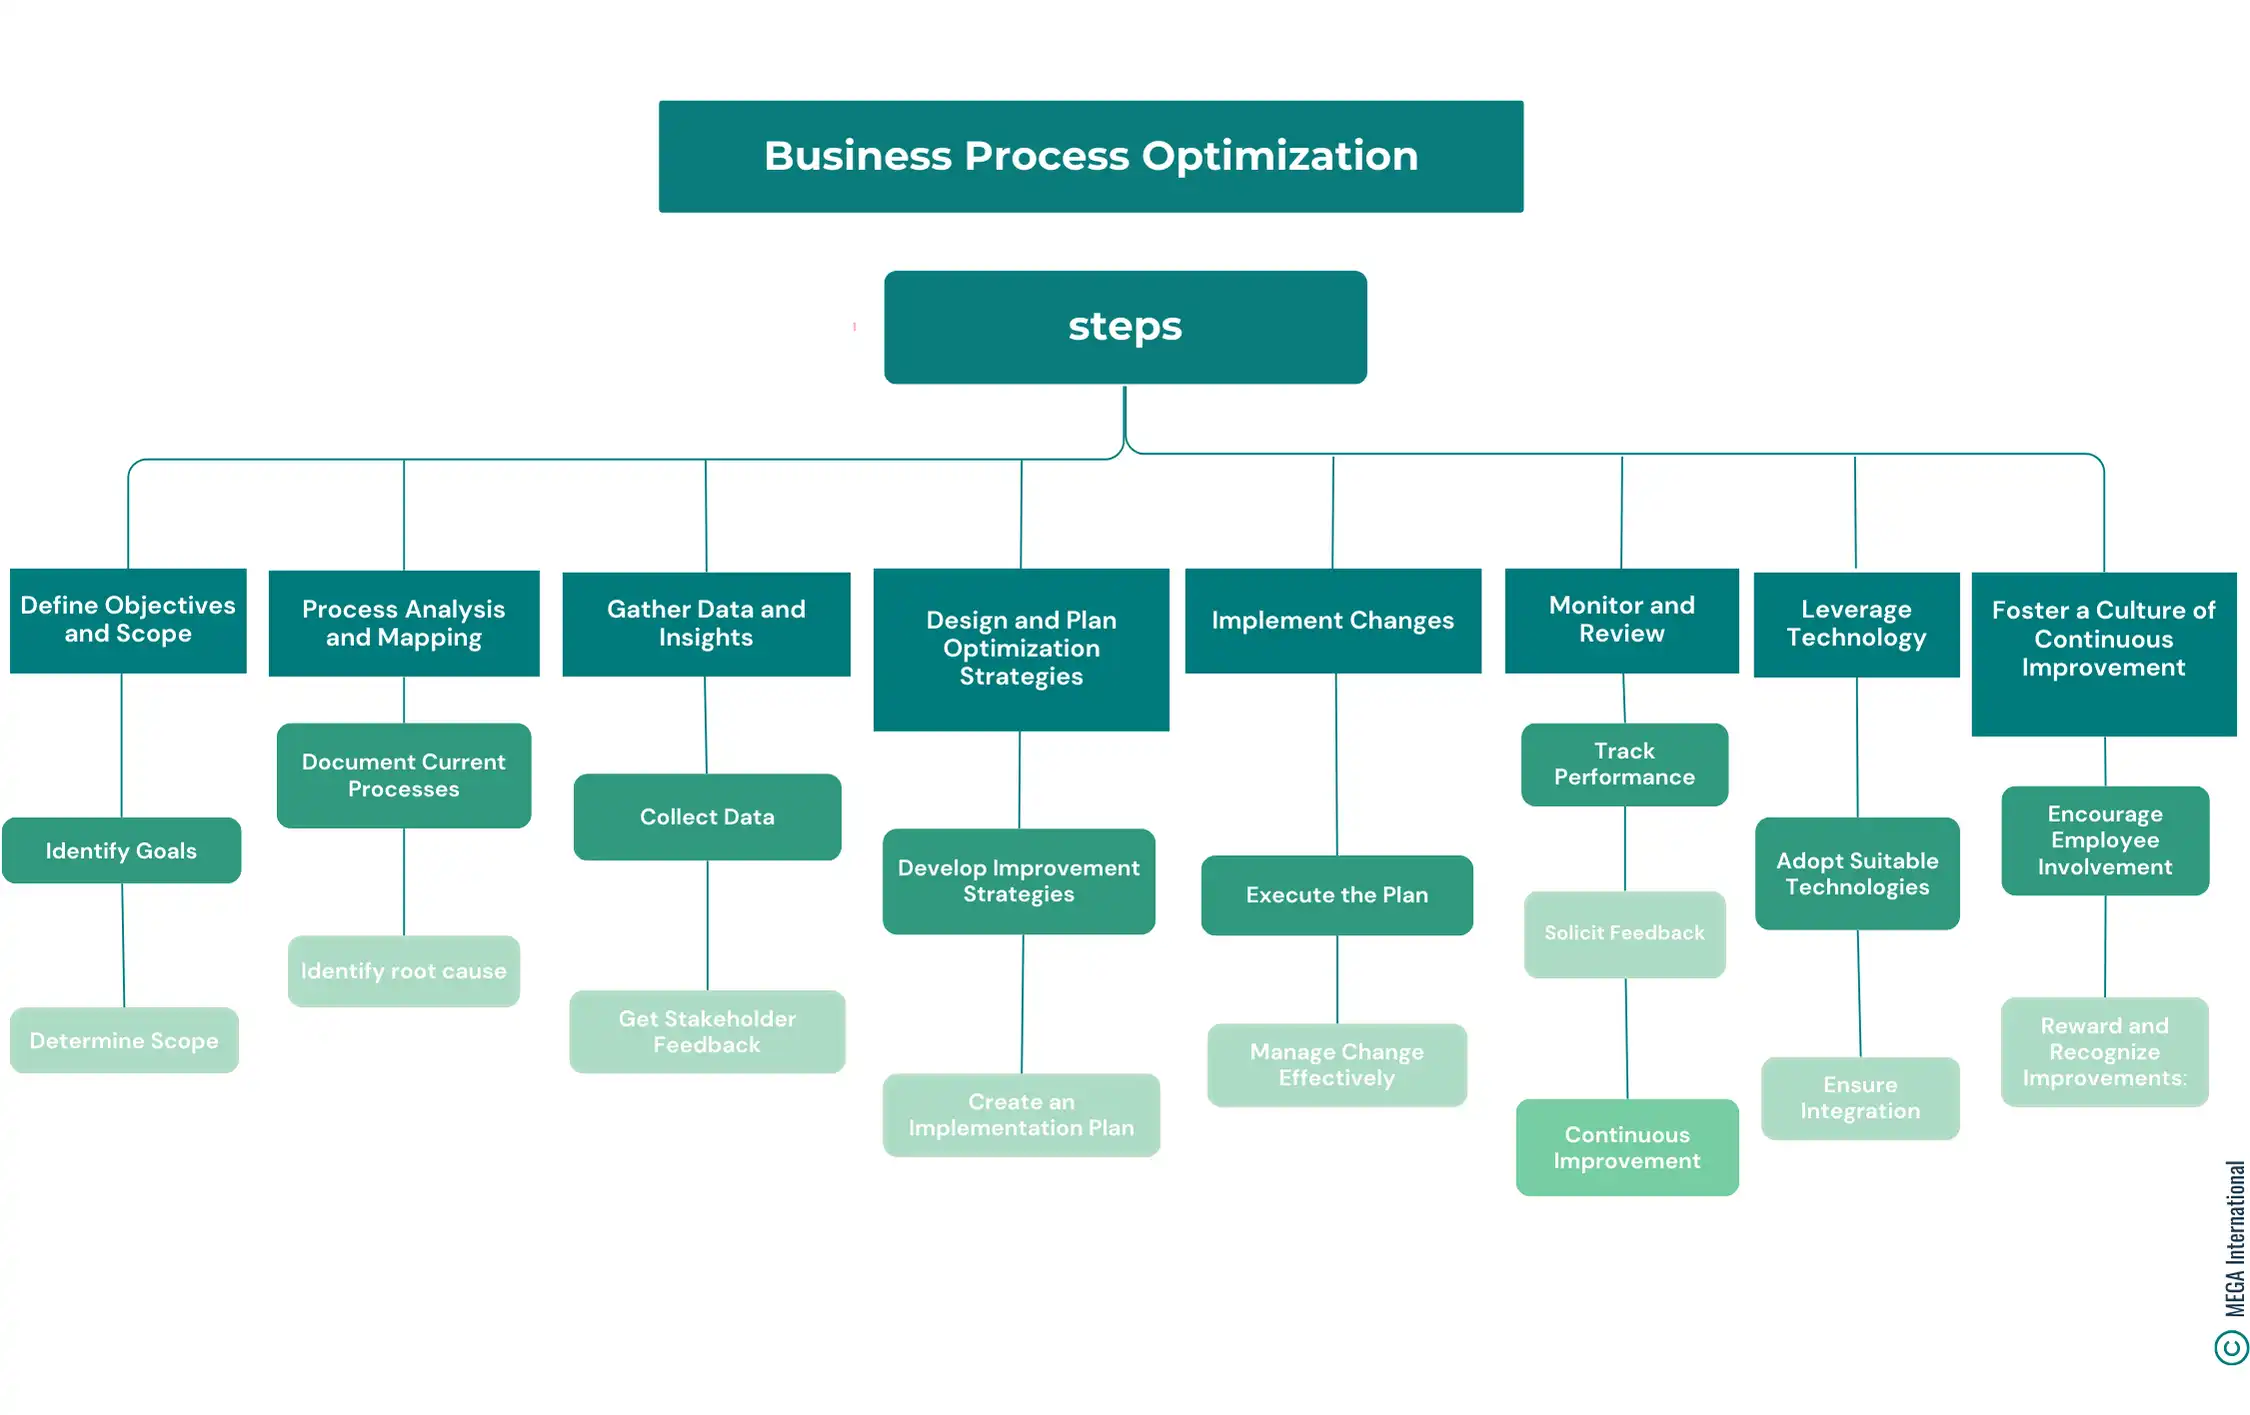 How to Implement Business Process Optimization